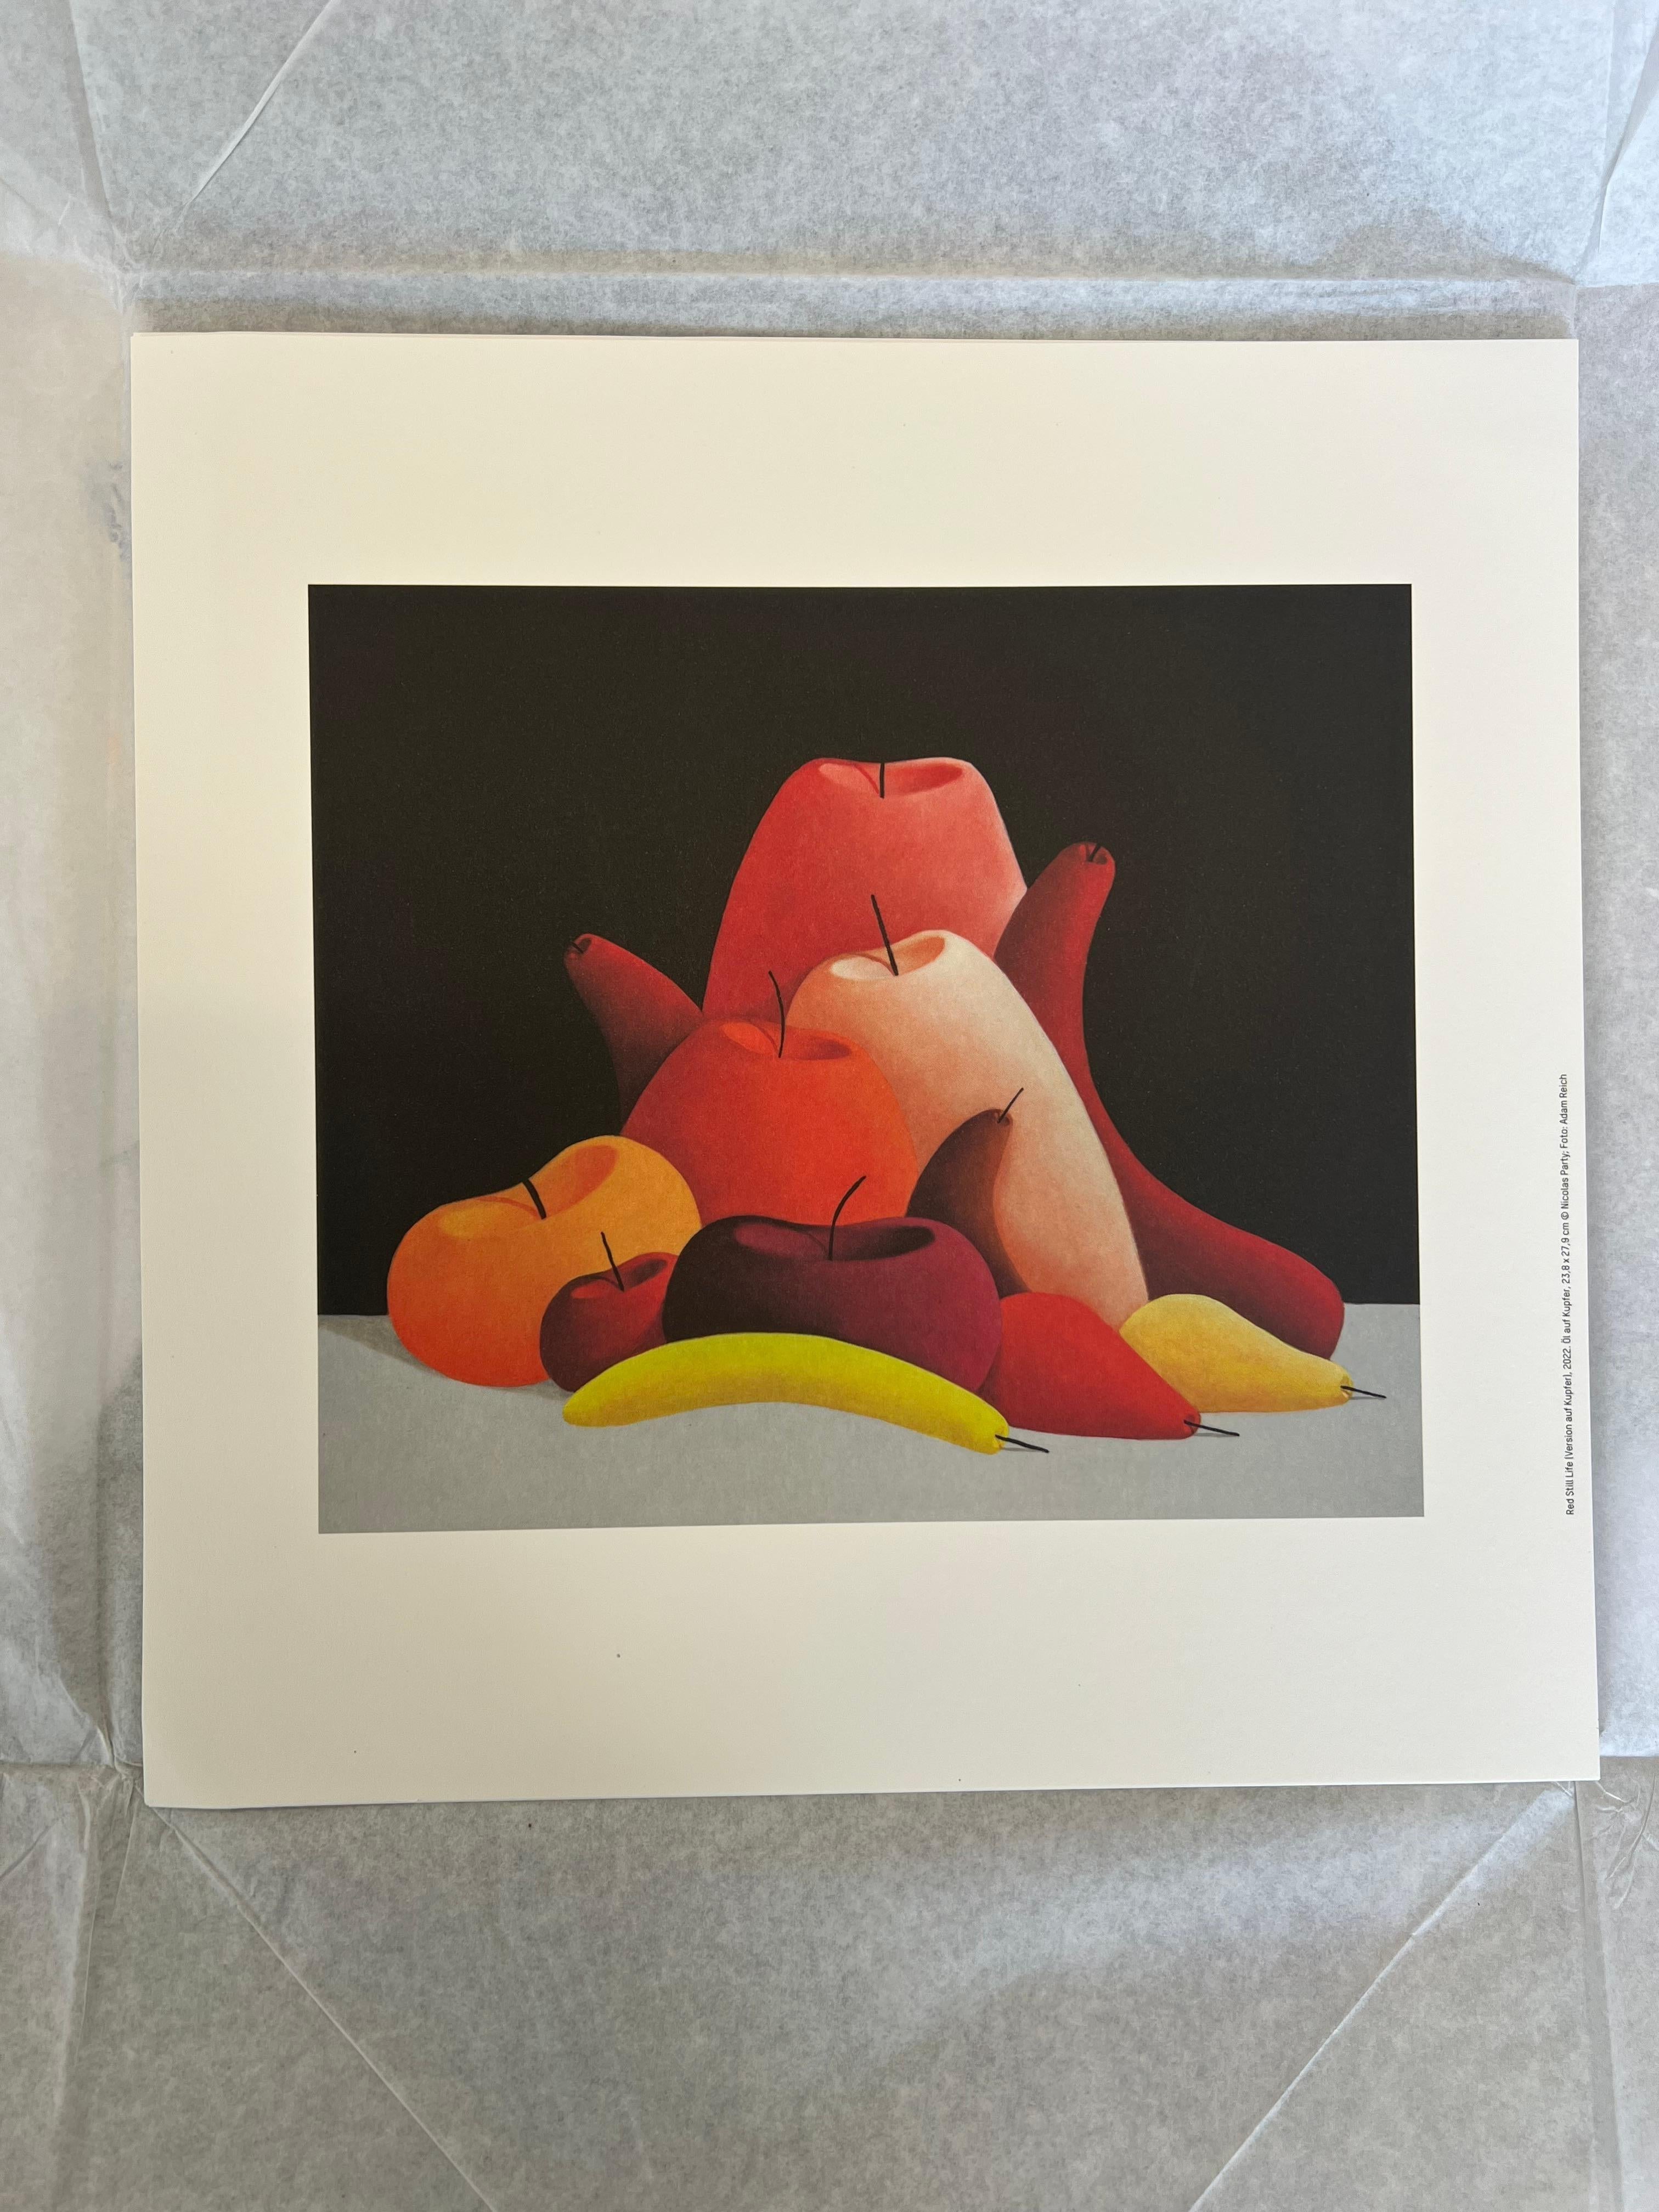 NICOLAS PARTY
STILL LIFE (RED), 2023
4 Colour offset print on thick matte paper.
30 × 30 cm
Edition of 100

Produced by MUSEUM FRIEDER BURDA.